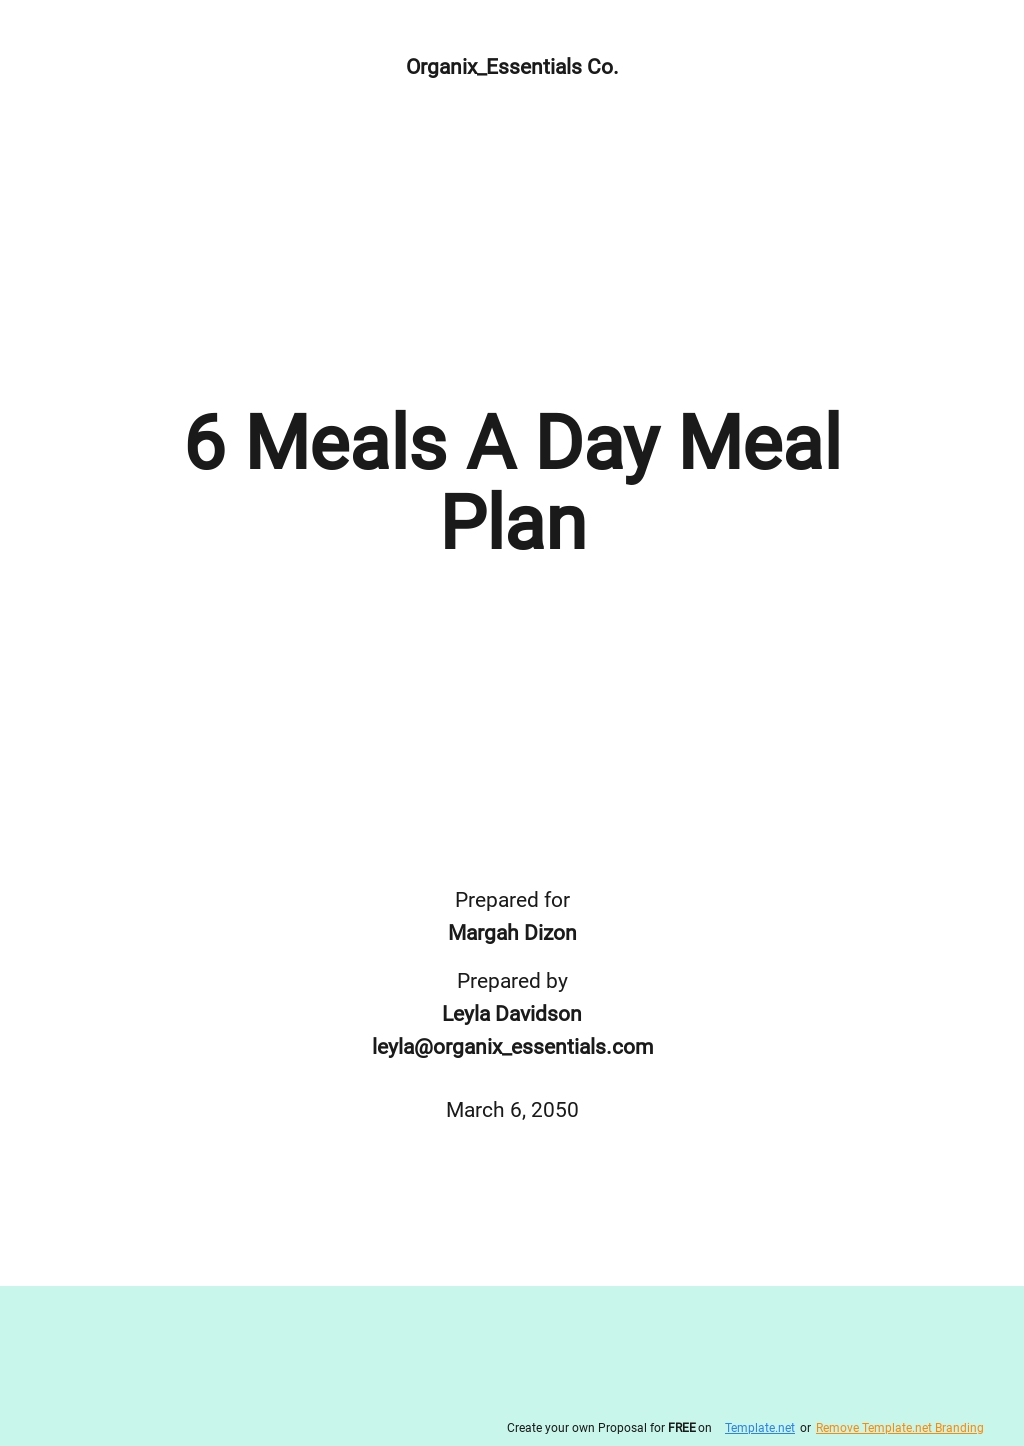 6 Meals a Day Meal Plans in Word - Templates, Designs, Docs, Free ...